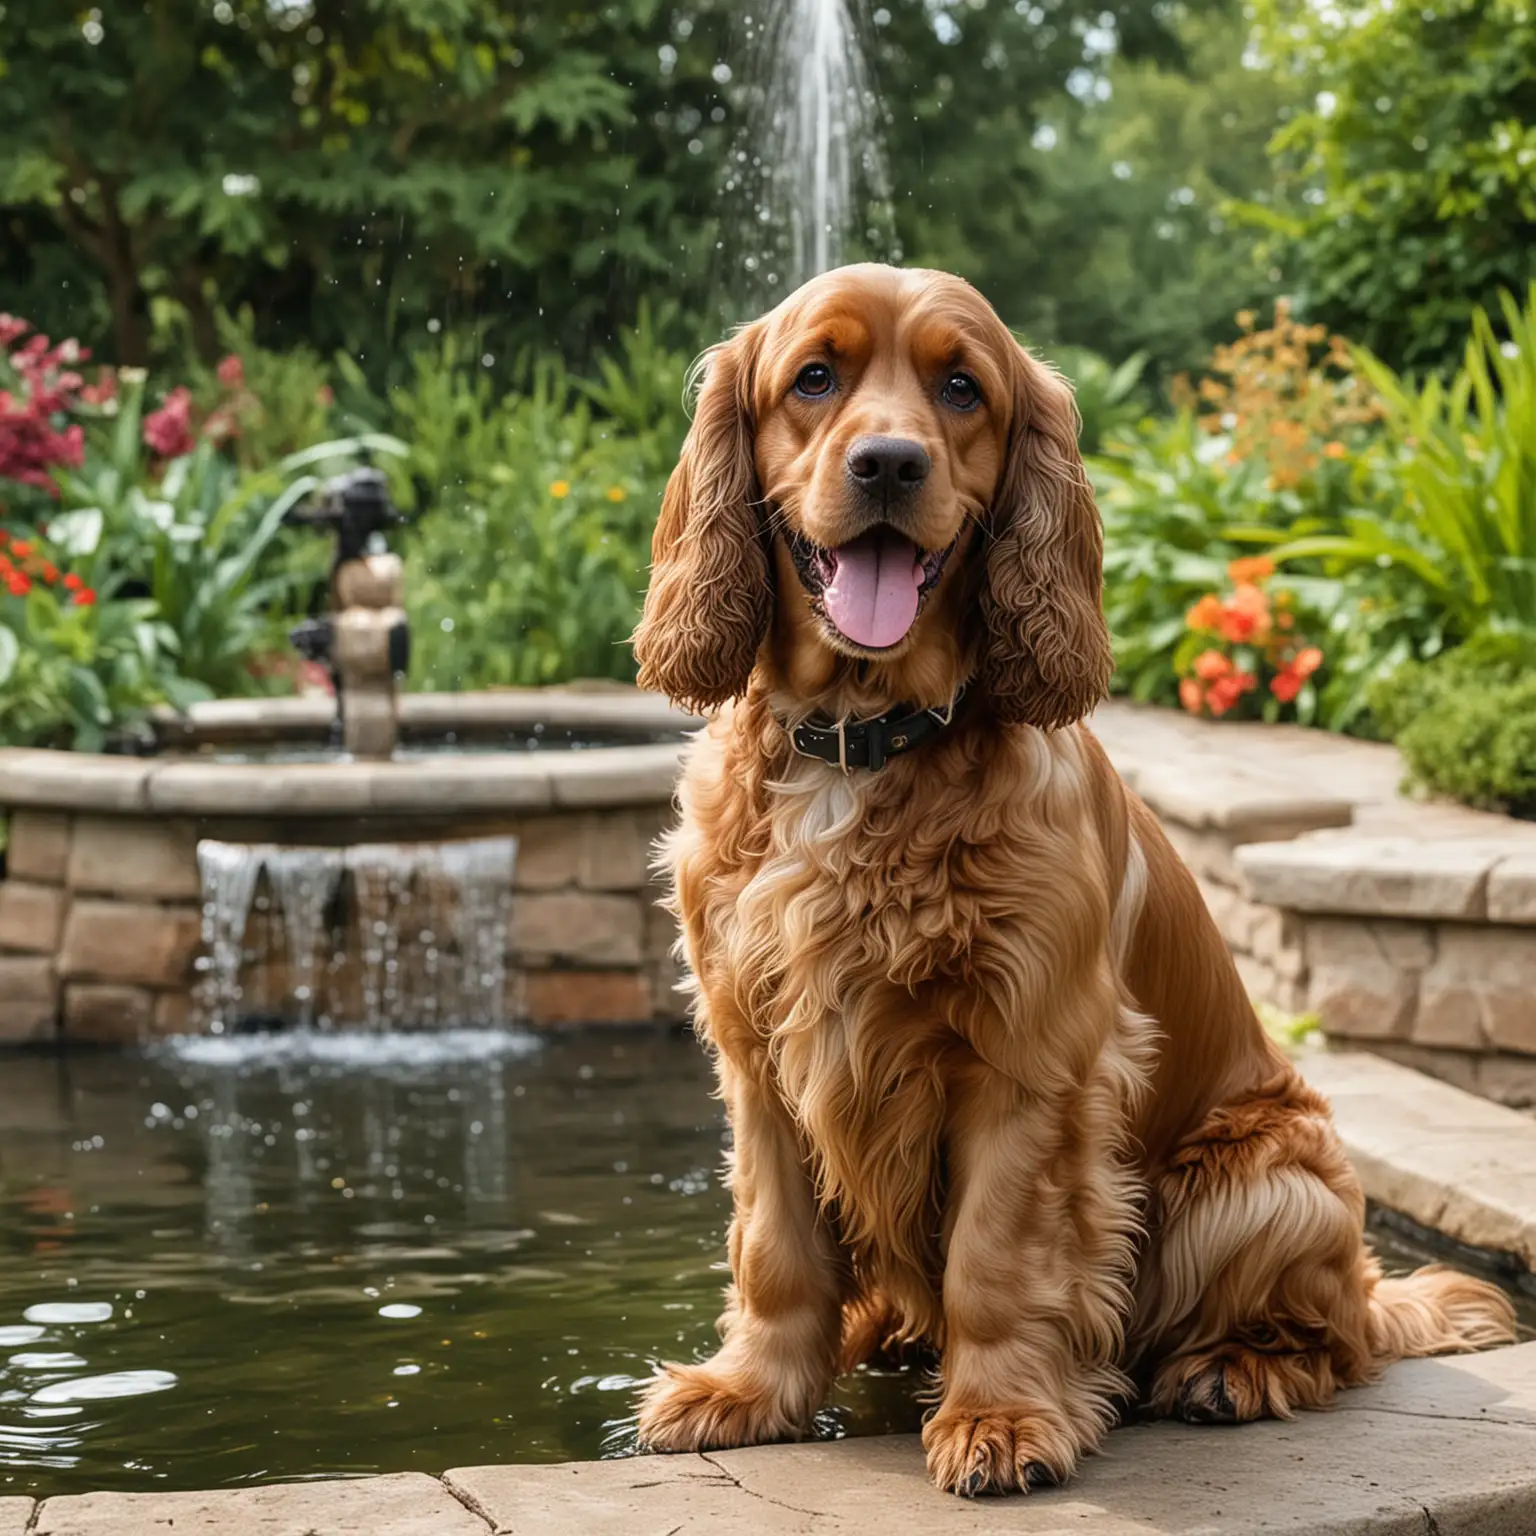 image of a beautifully groomed English Cocker Spaniel sitting infront of a beautiful backyard fountain-fish pond, have the dog smiling and happy, have the dog smiling with his tongue out, do not have the dog in the pond, but on the side of it